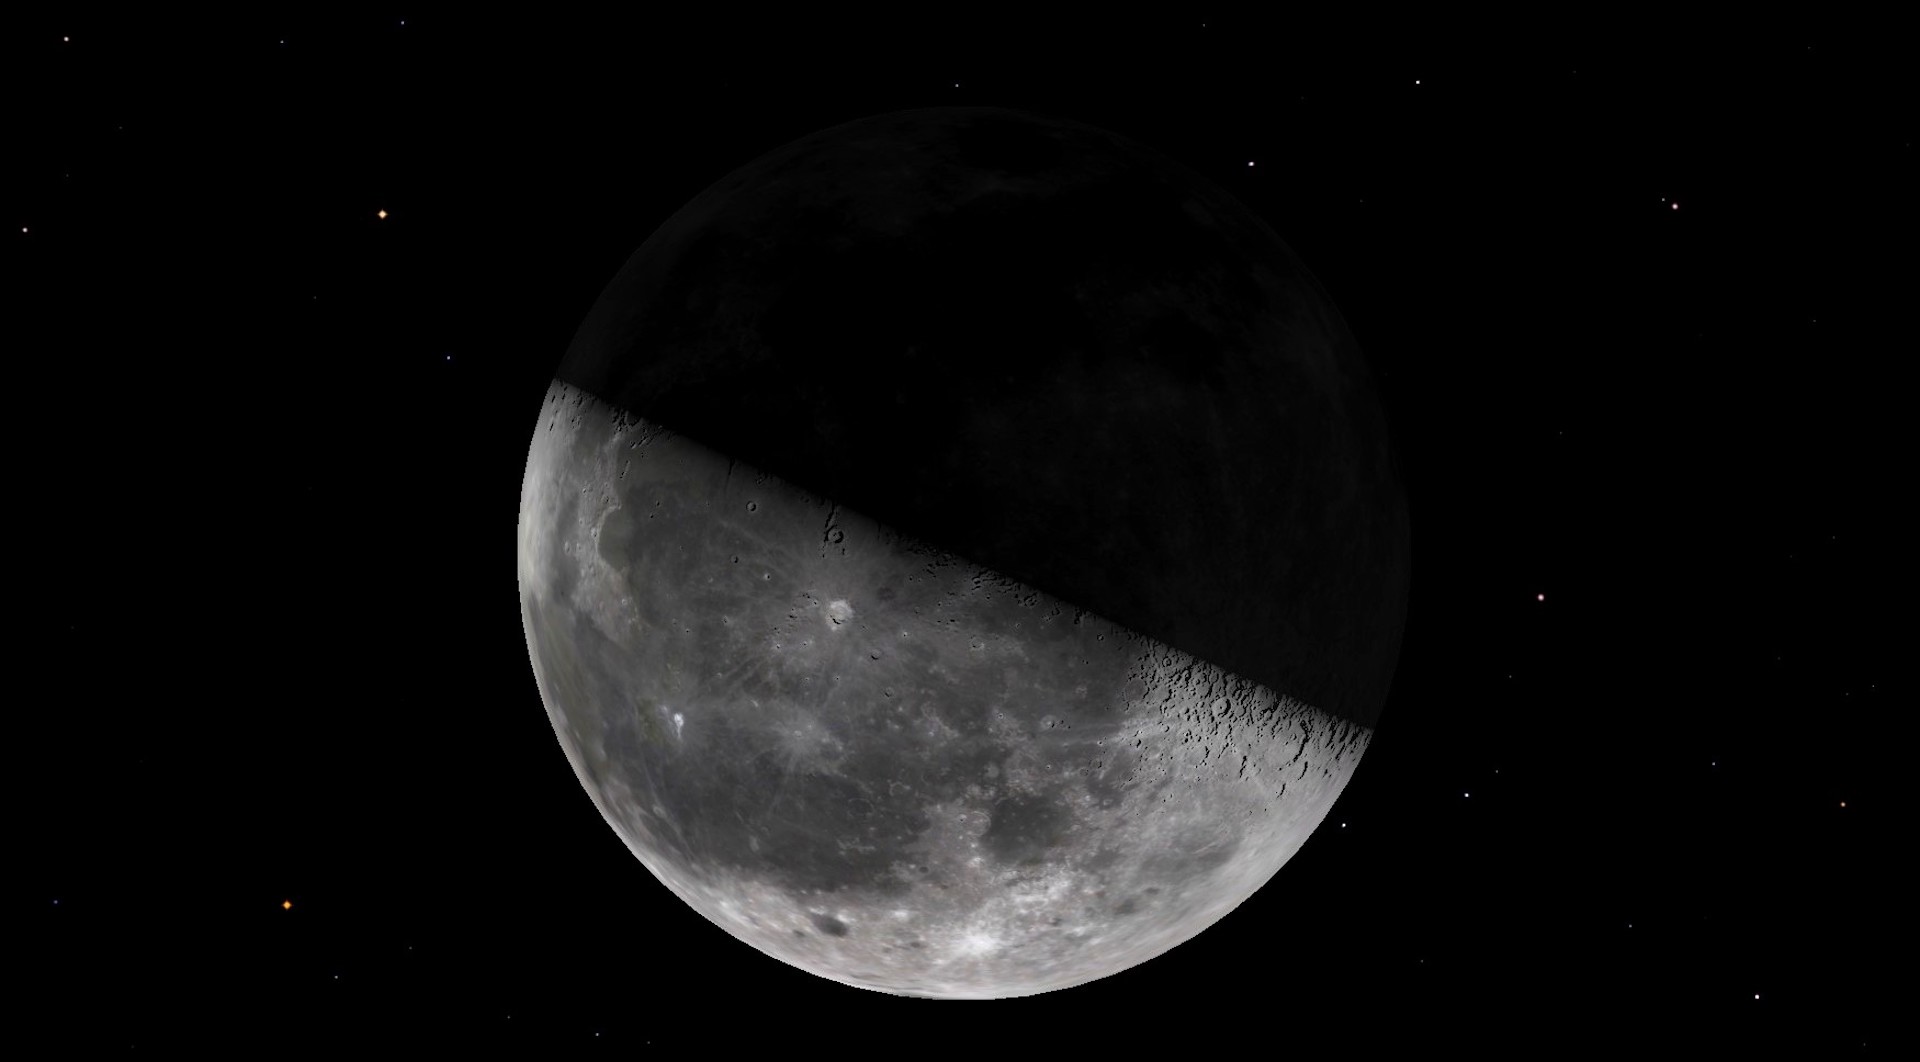 An illustration of the last quarter moon as it will appear on the evening of January 14.